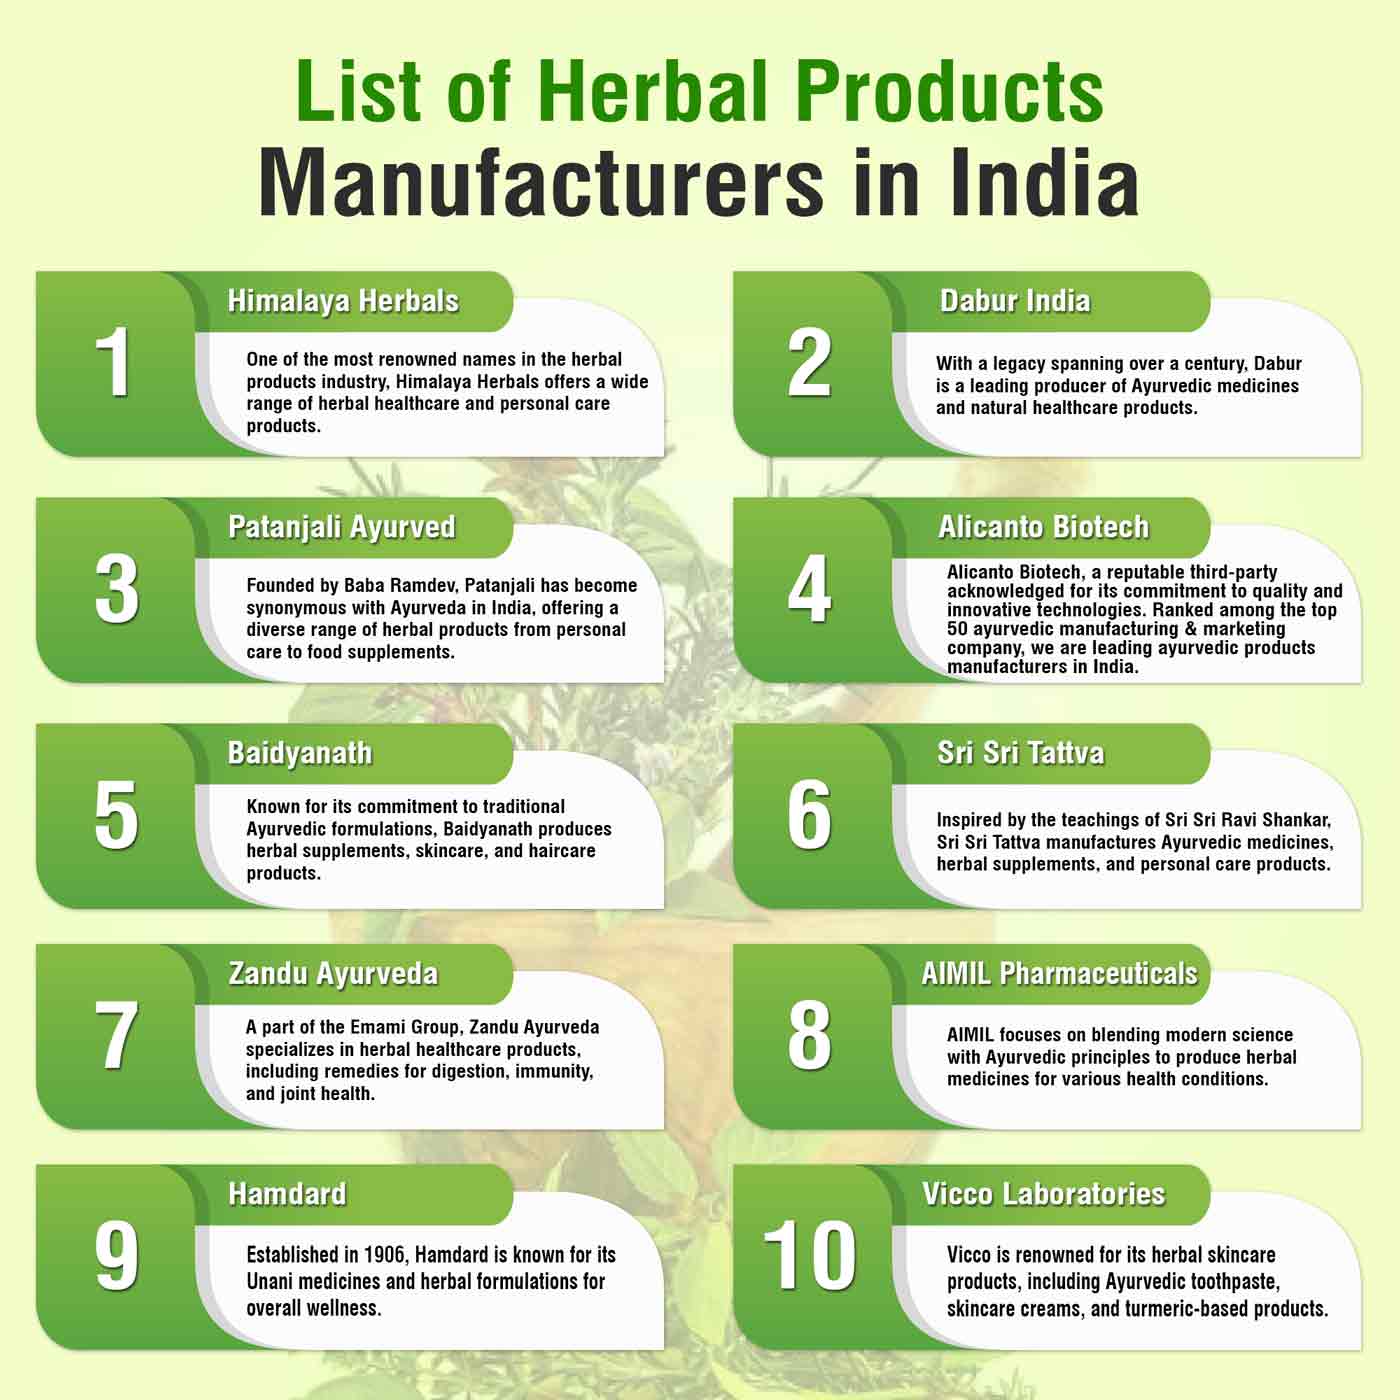 List of Herbal Products Manufacturers in India - Alicanto Biotech